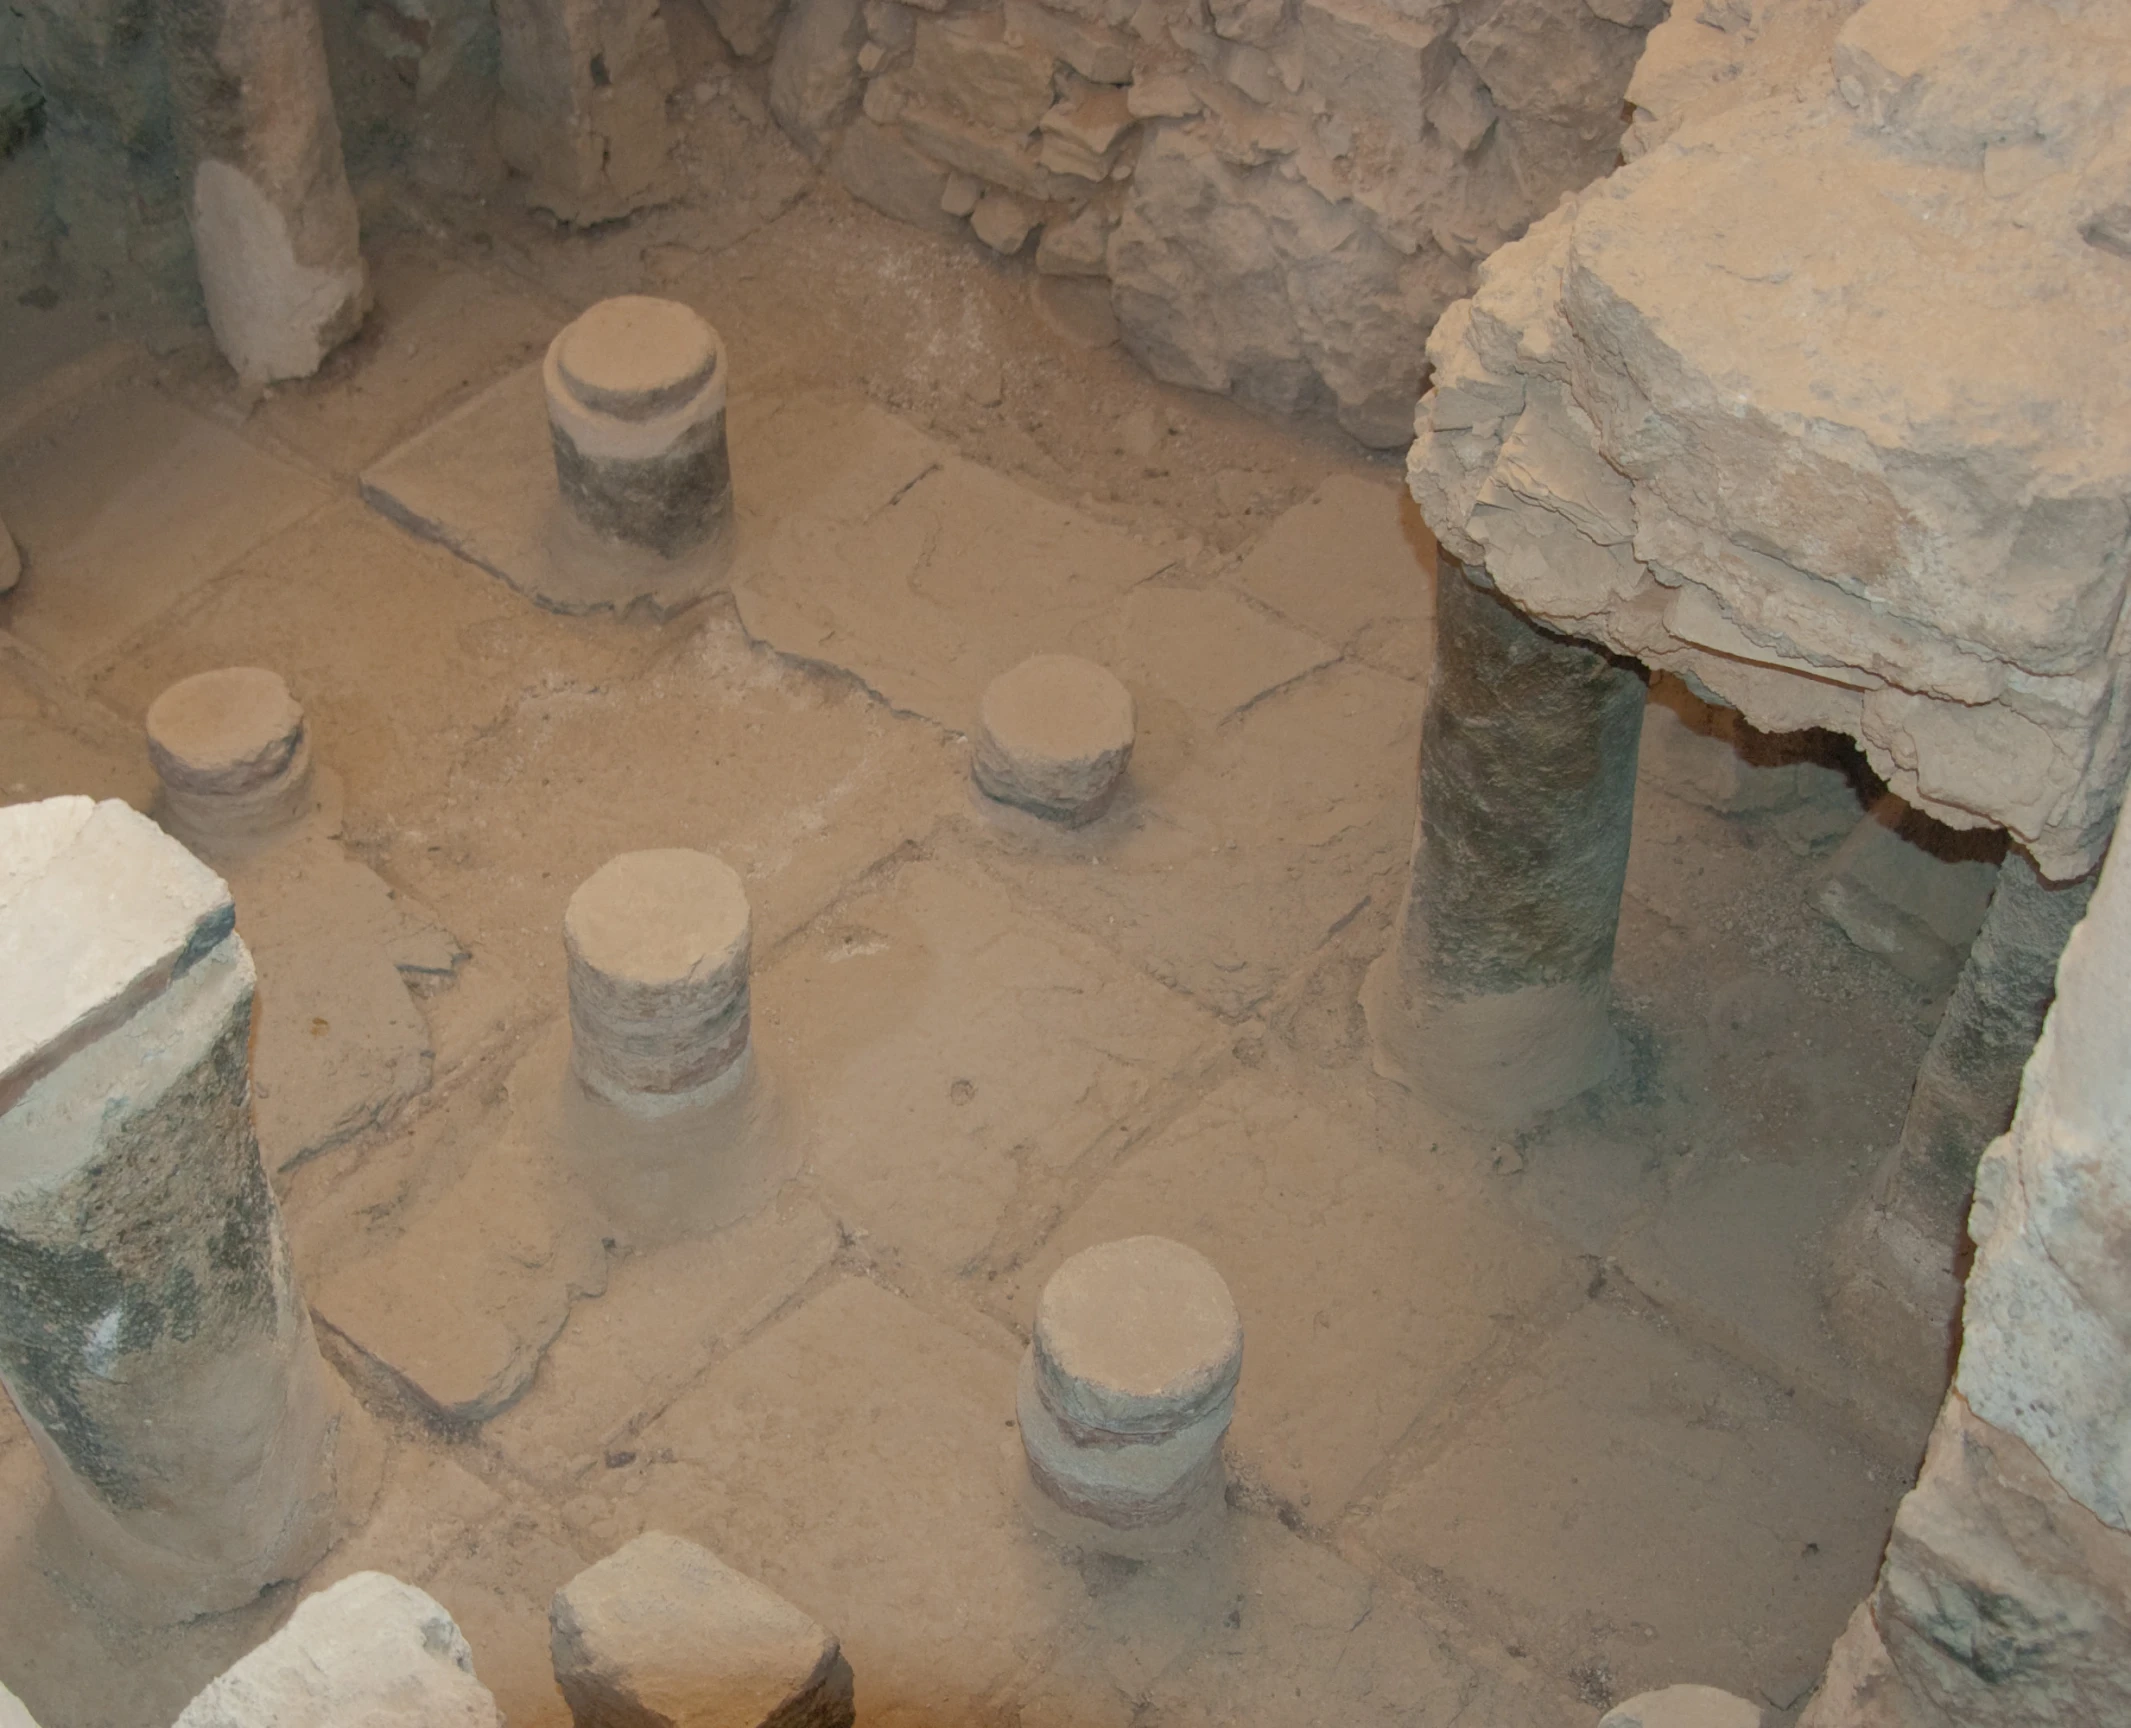 several stone jars are stacked together in a room